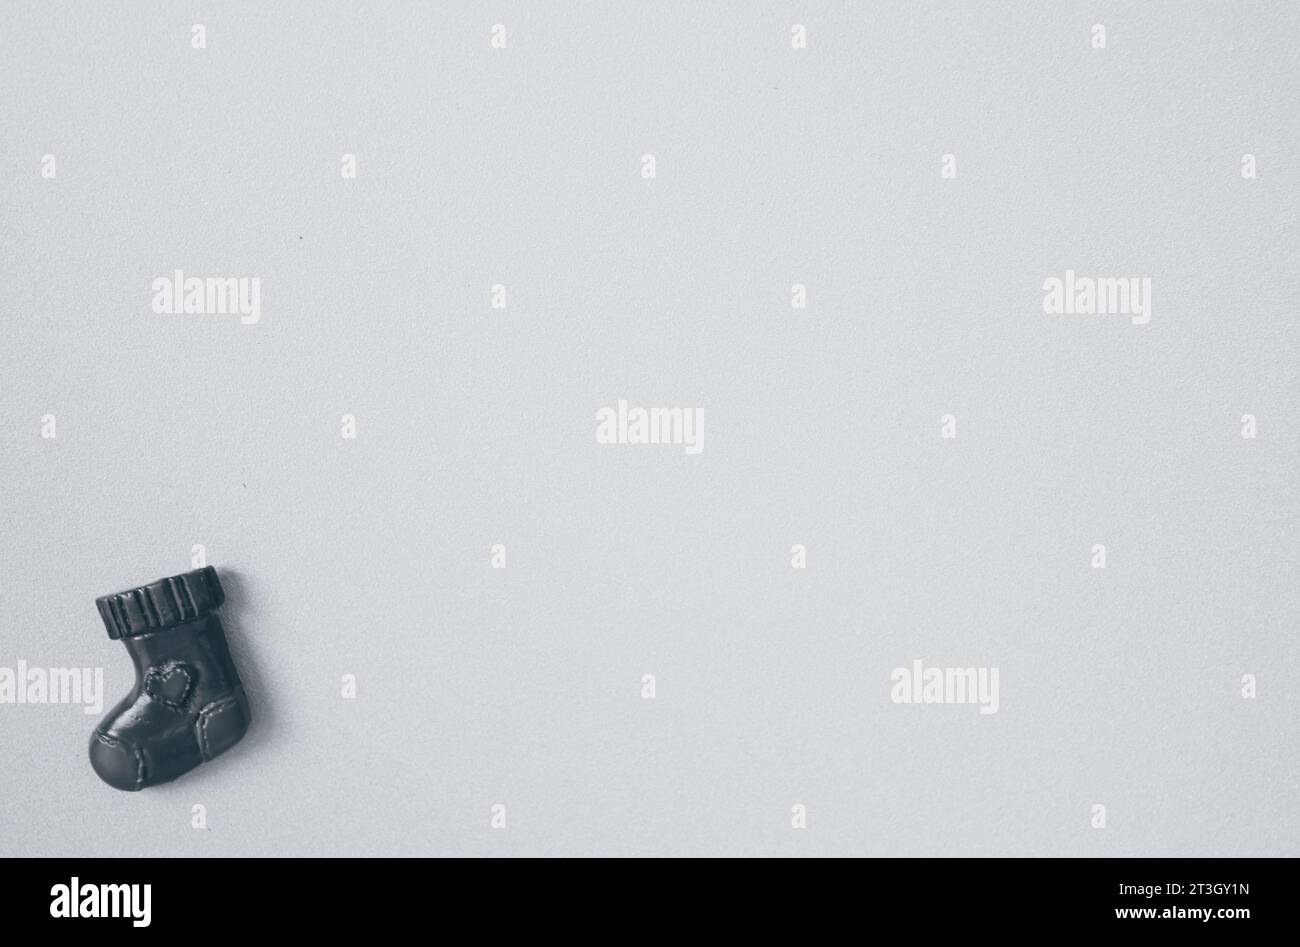 View of magnets against white background Stock Photo